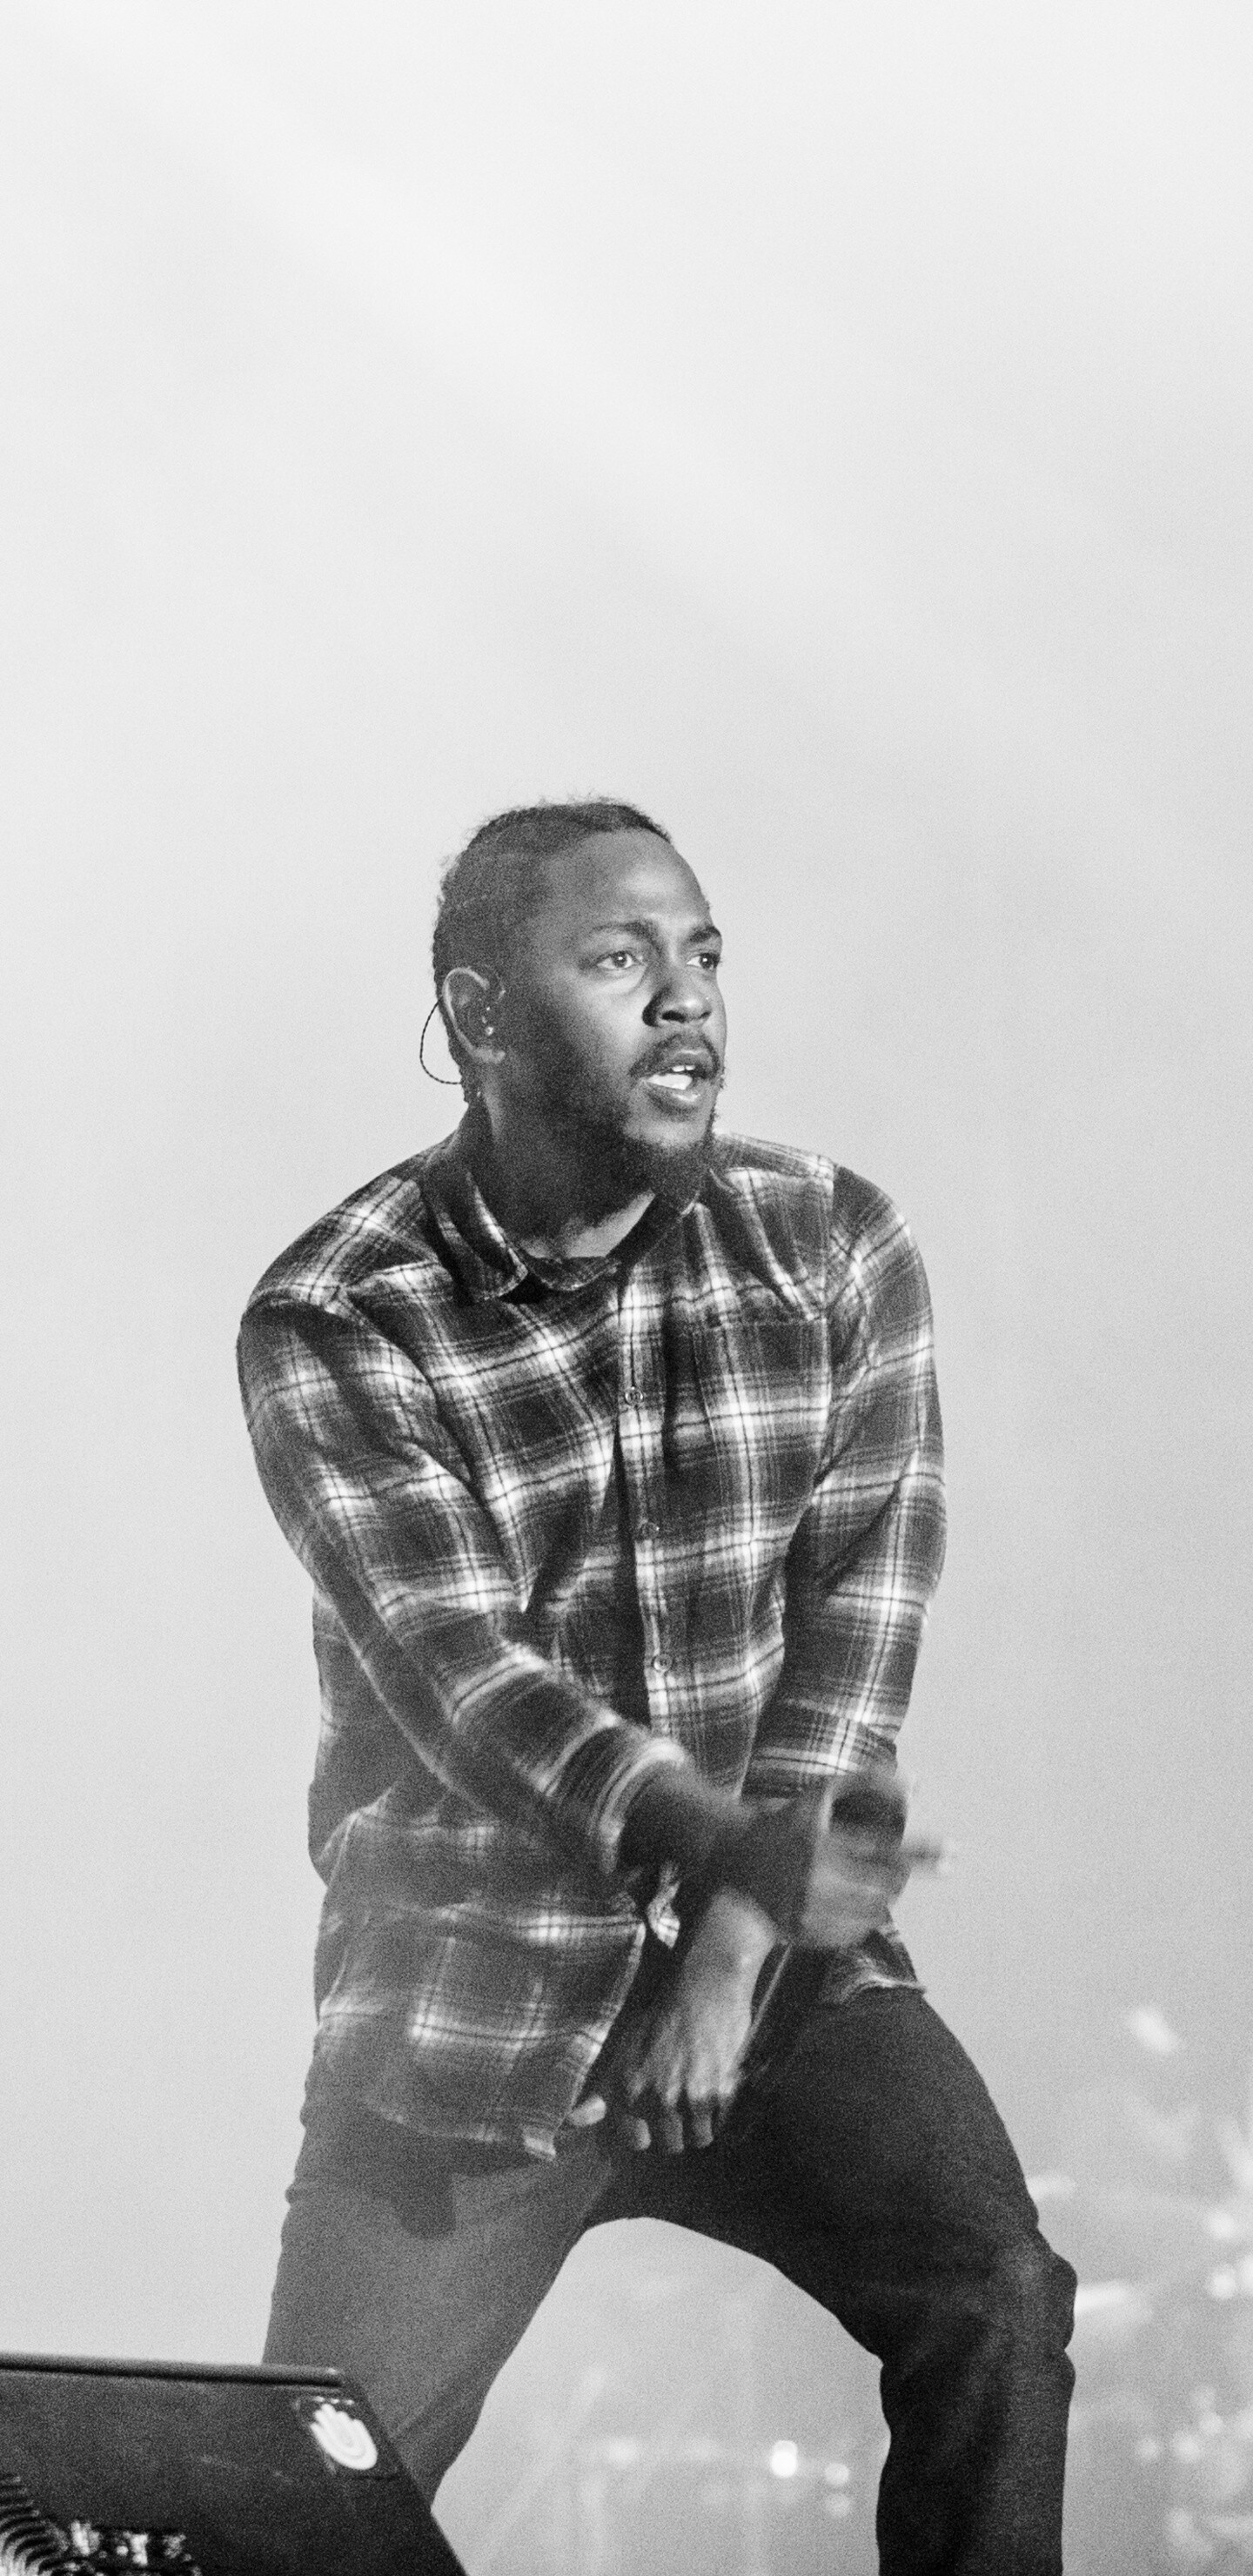 Kendrick Lamar: Monochrome, "HiiiPower" was released on April 12, 2011, as his debut single. 1440x2960 HD Wallpaper.